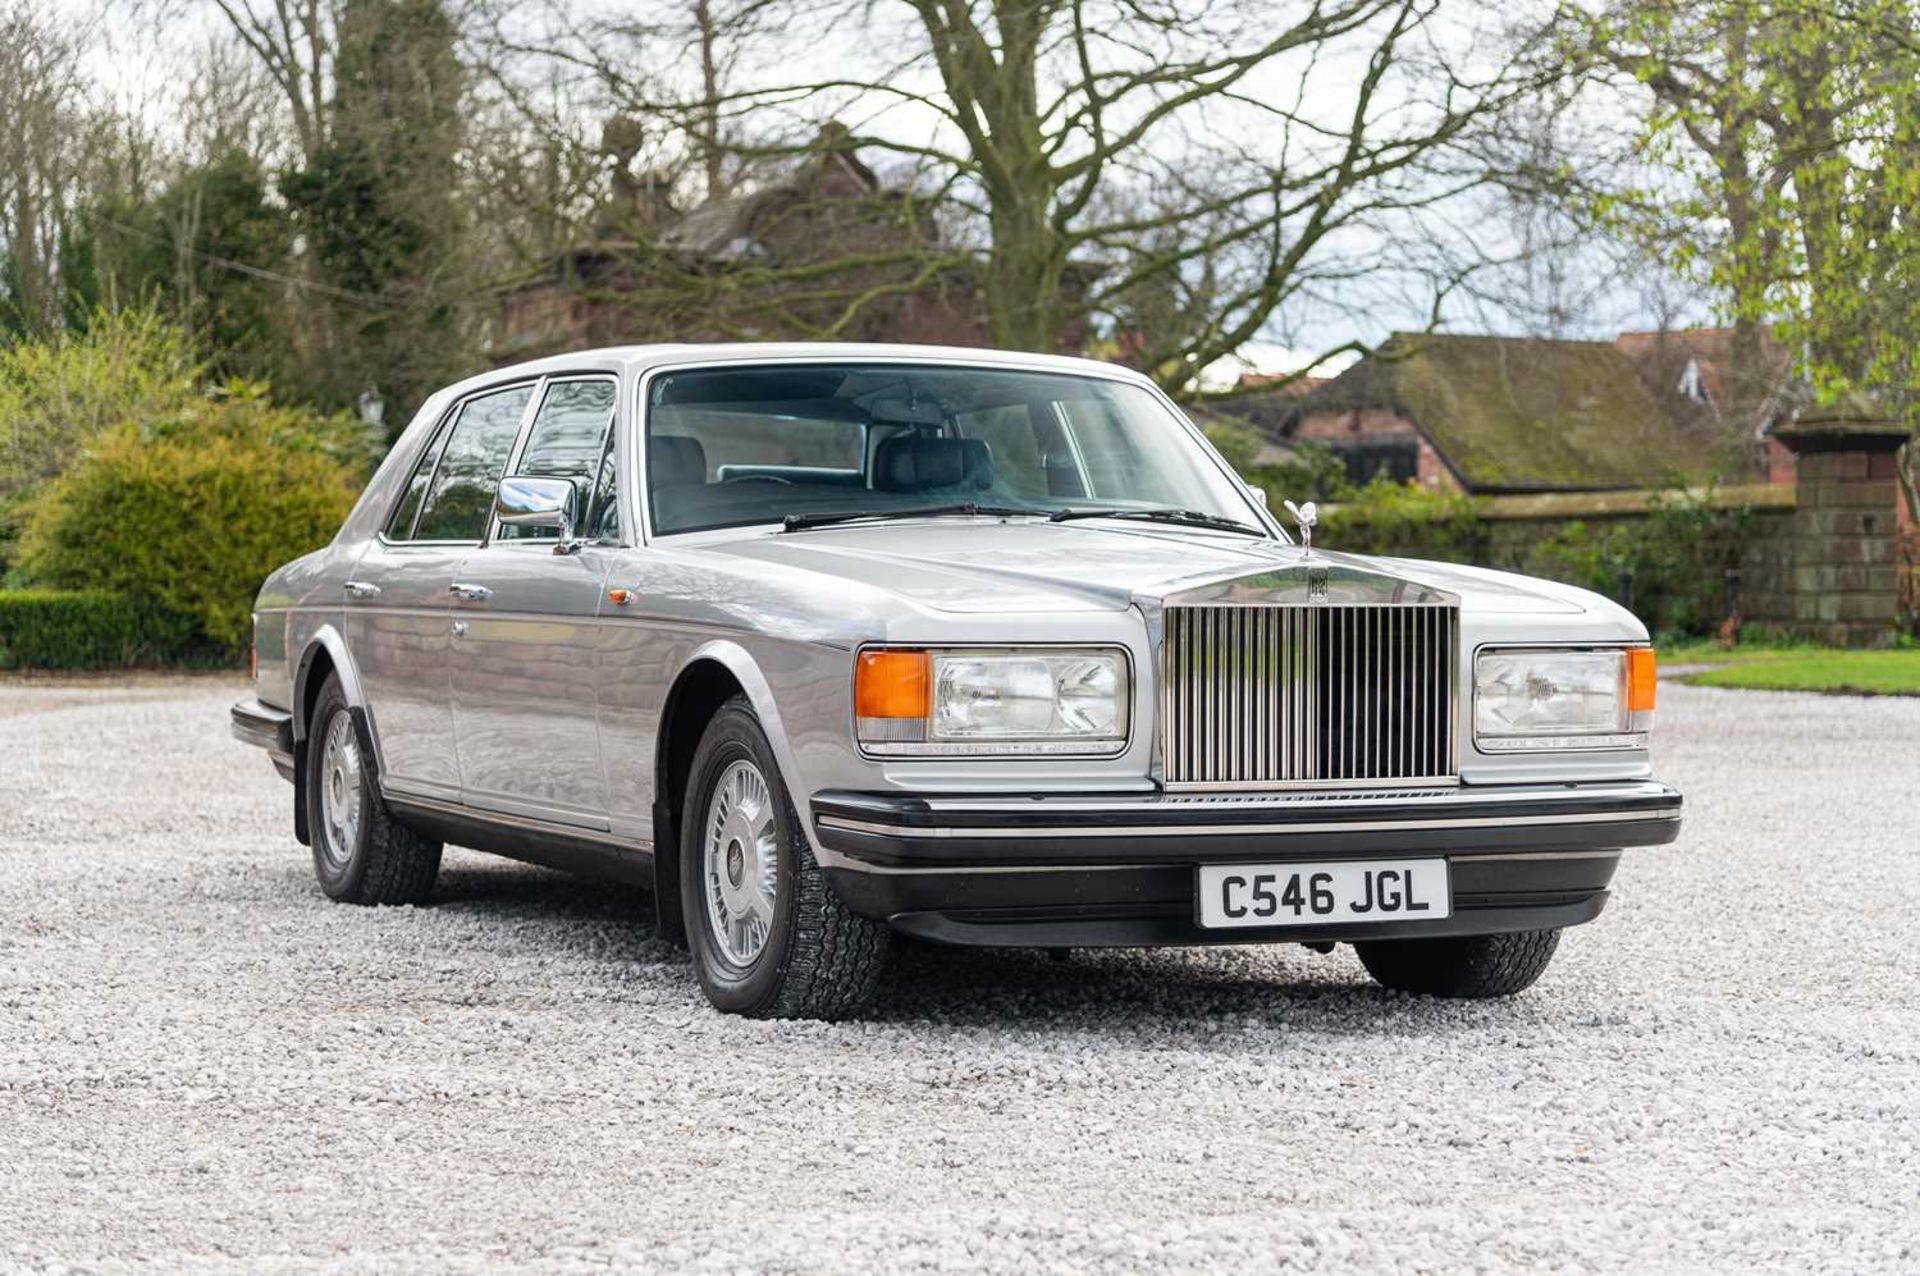 1985 Rolls Royce Silver Spirit From long term ownership, comes complete with comprehensive history f